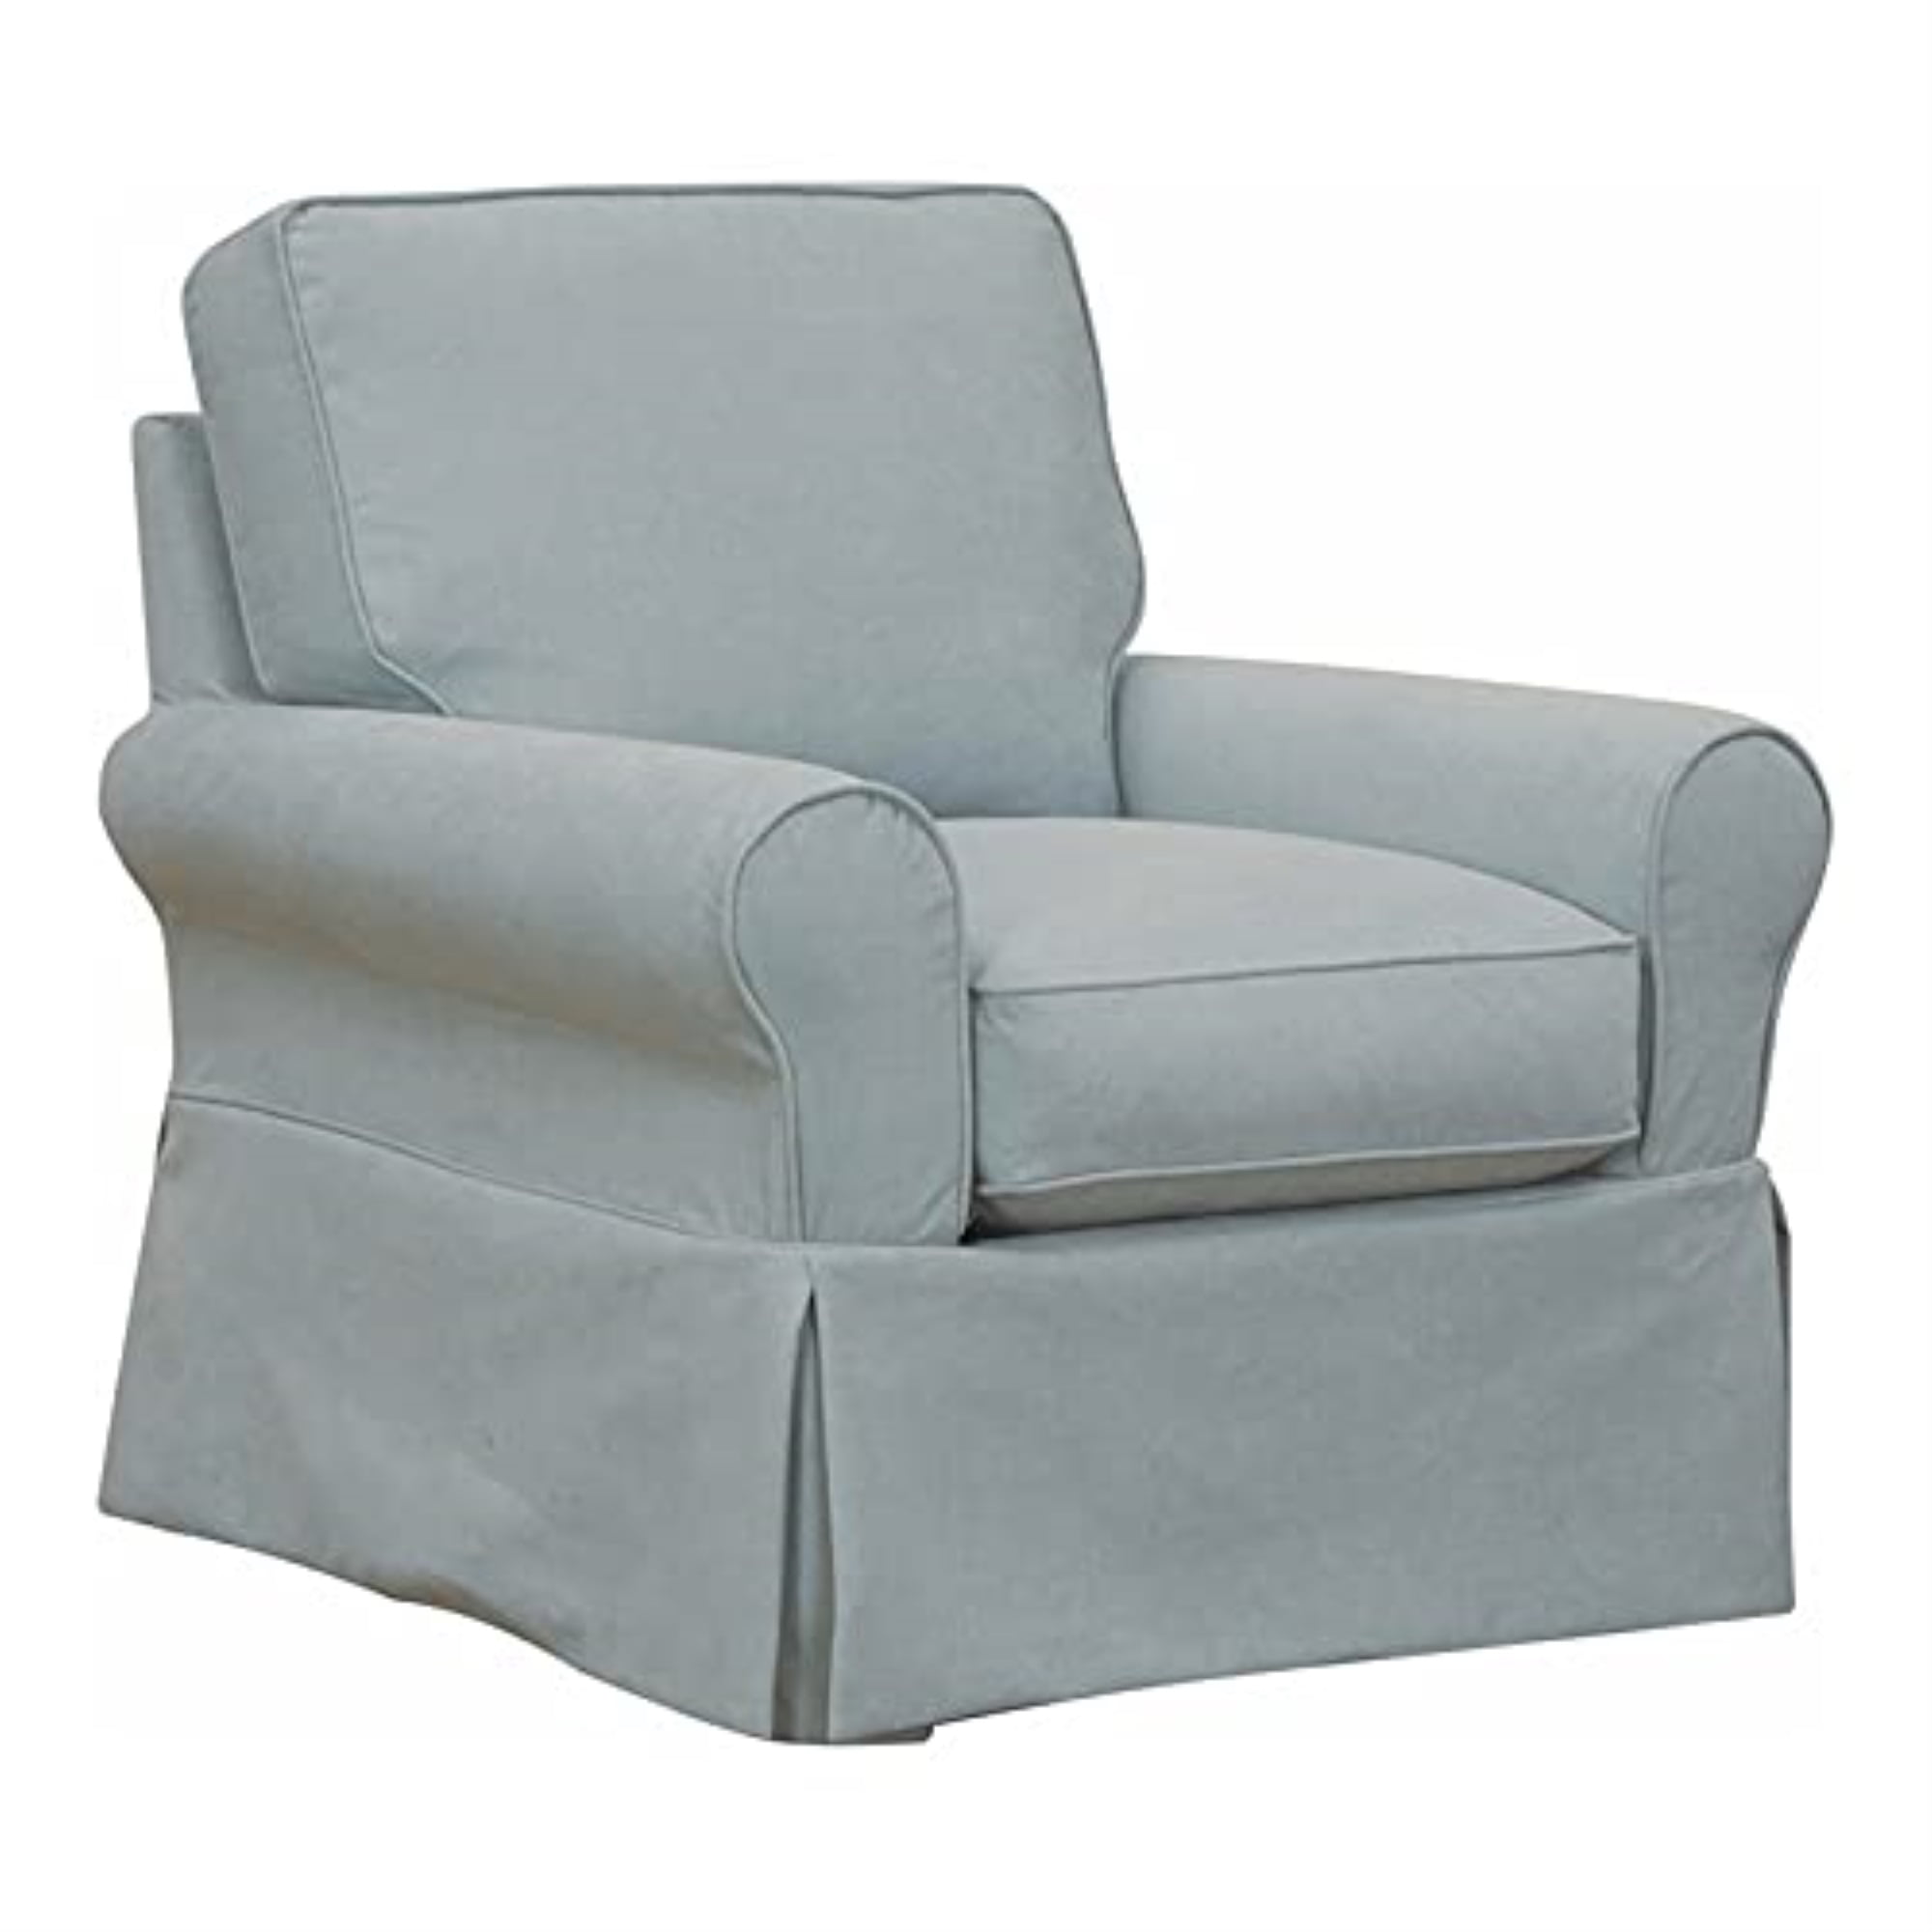 Details about   Sure Fit Every Day Chenille Chair Slipcover in Gray  Box Cushion 